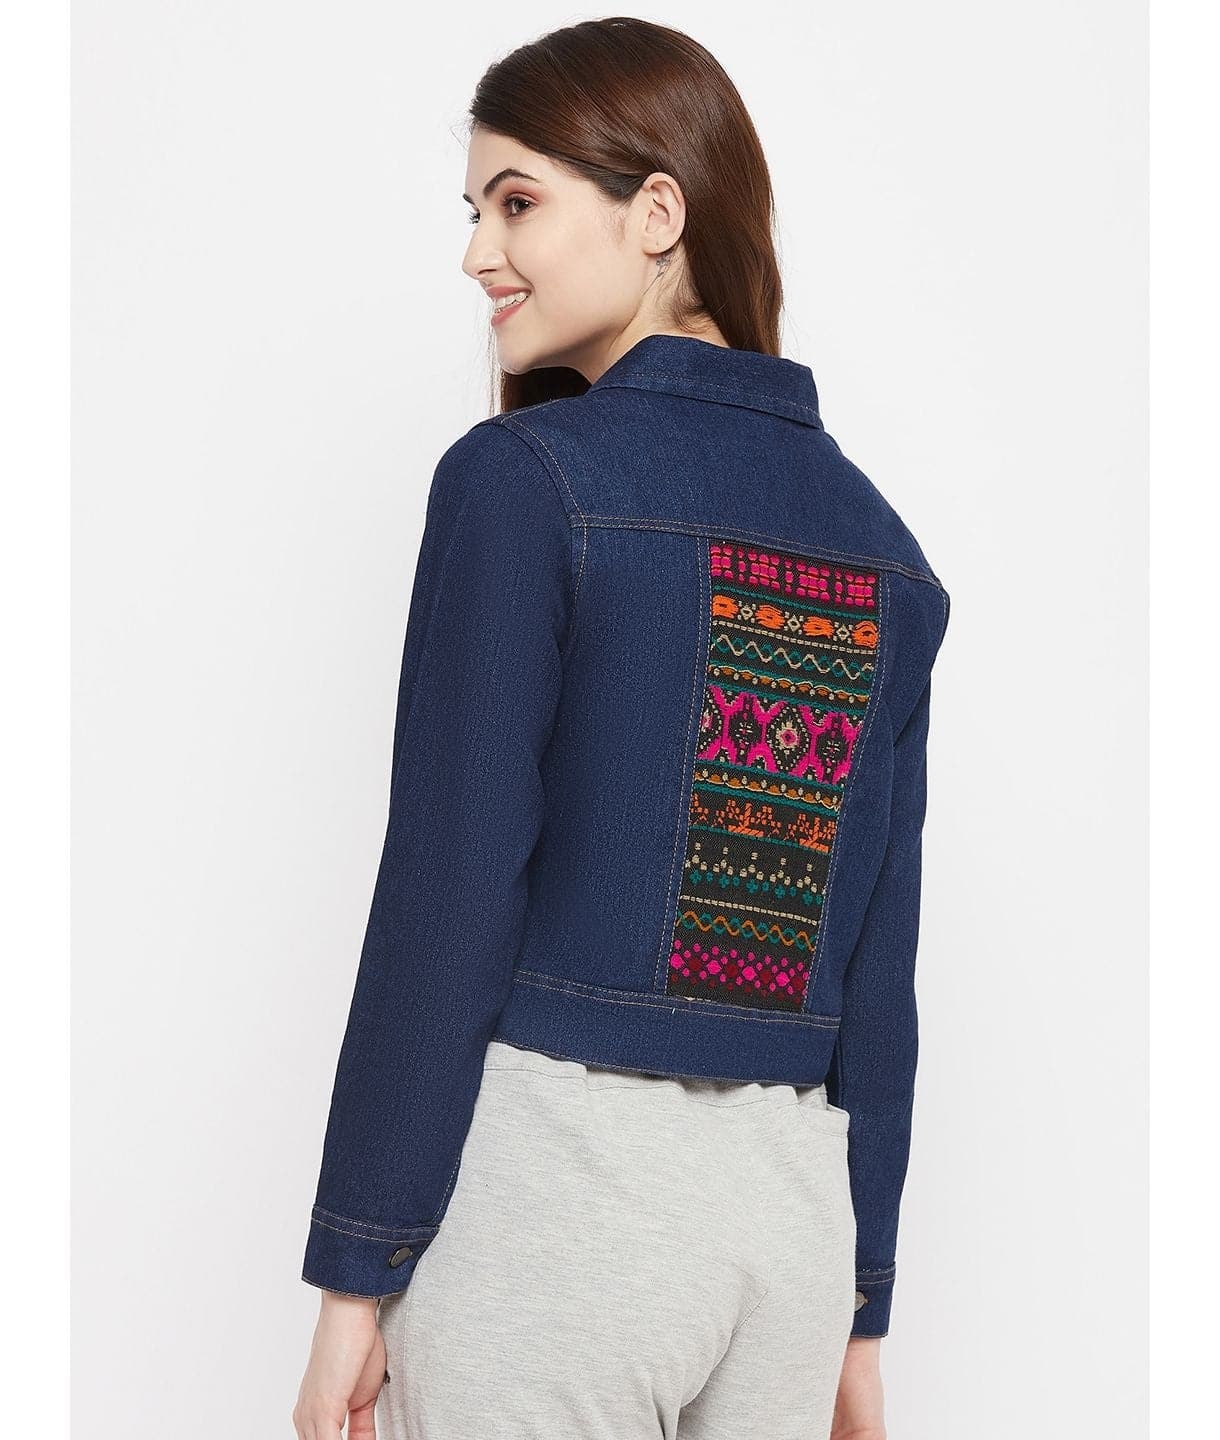 Lightweight Denim Jacket With Back Embroidery - Uptownie